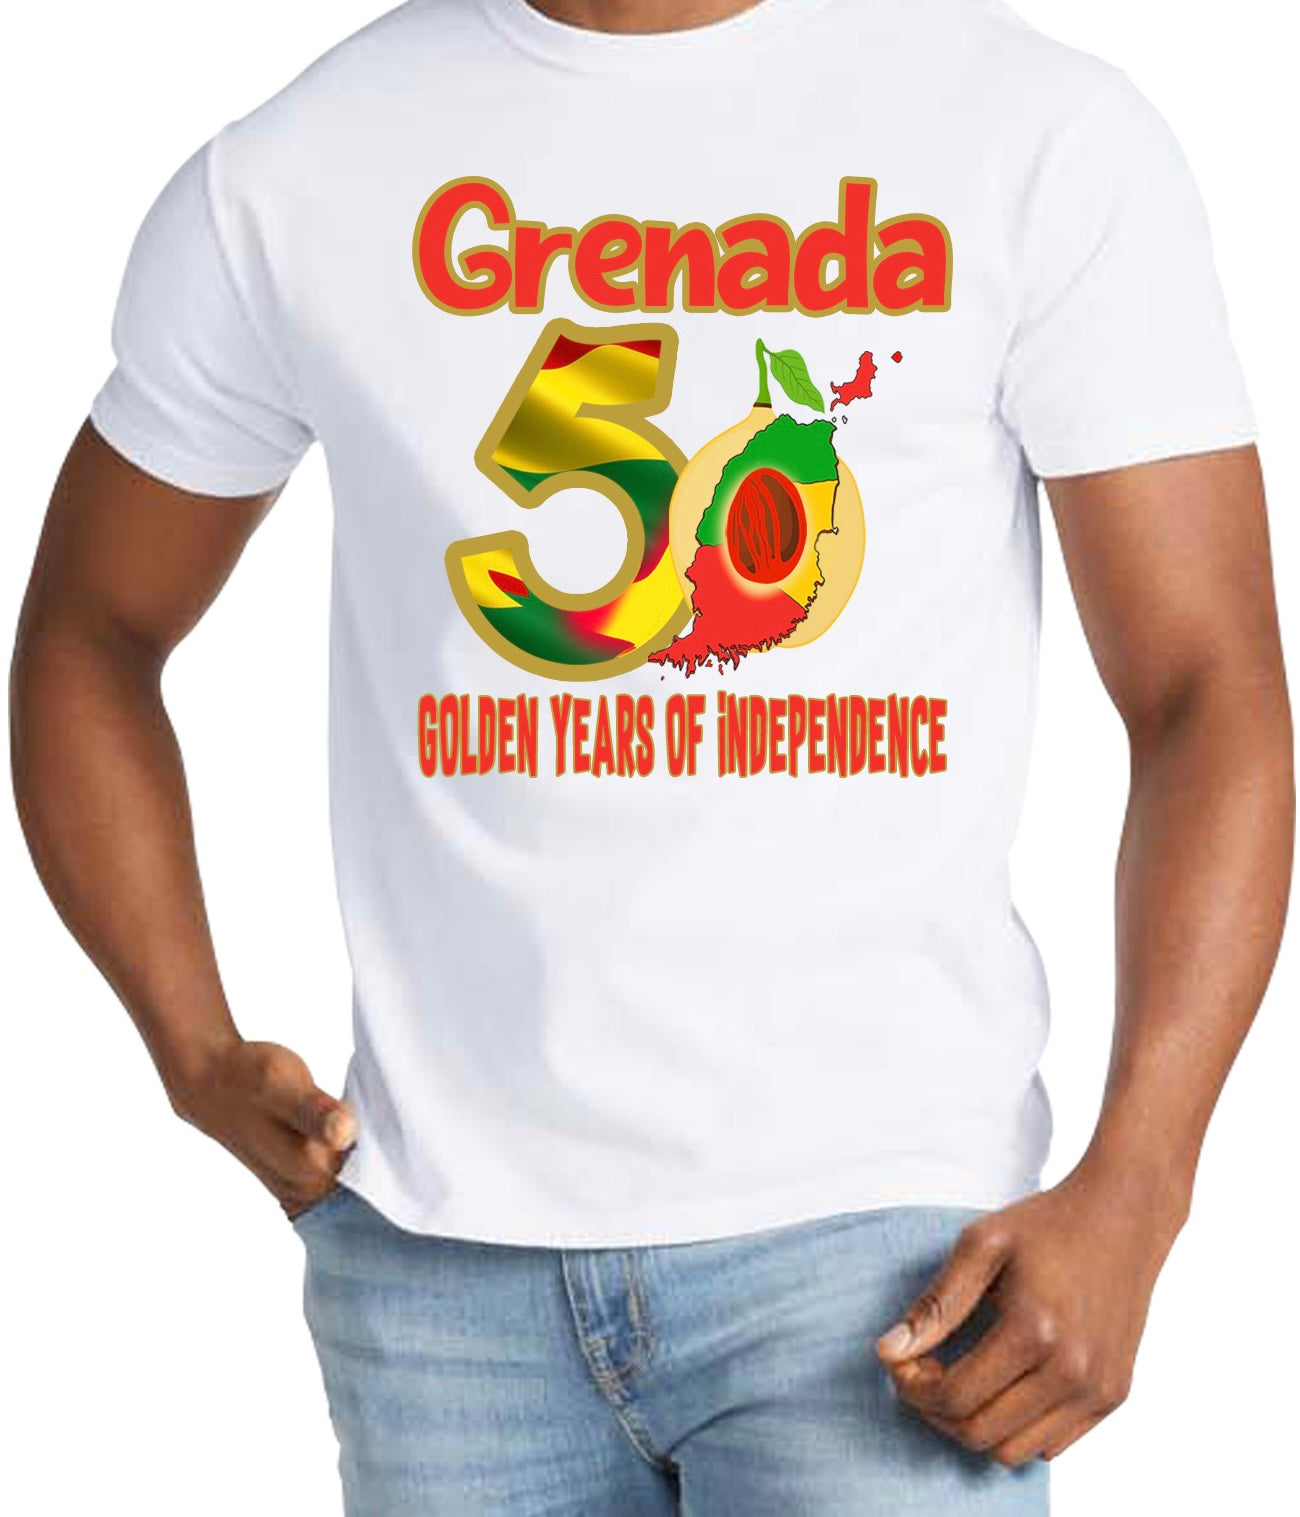 Grenada 50th Independence T-shirt